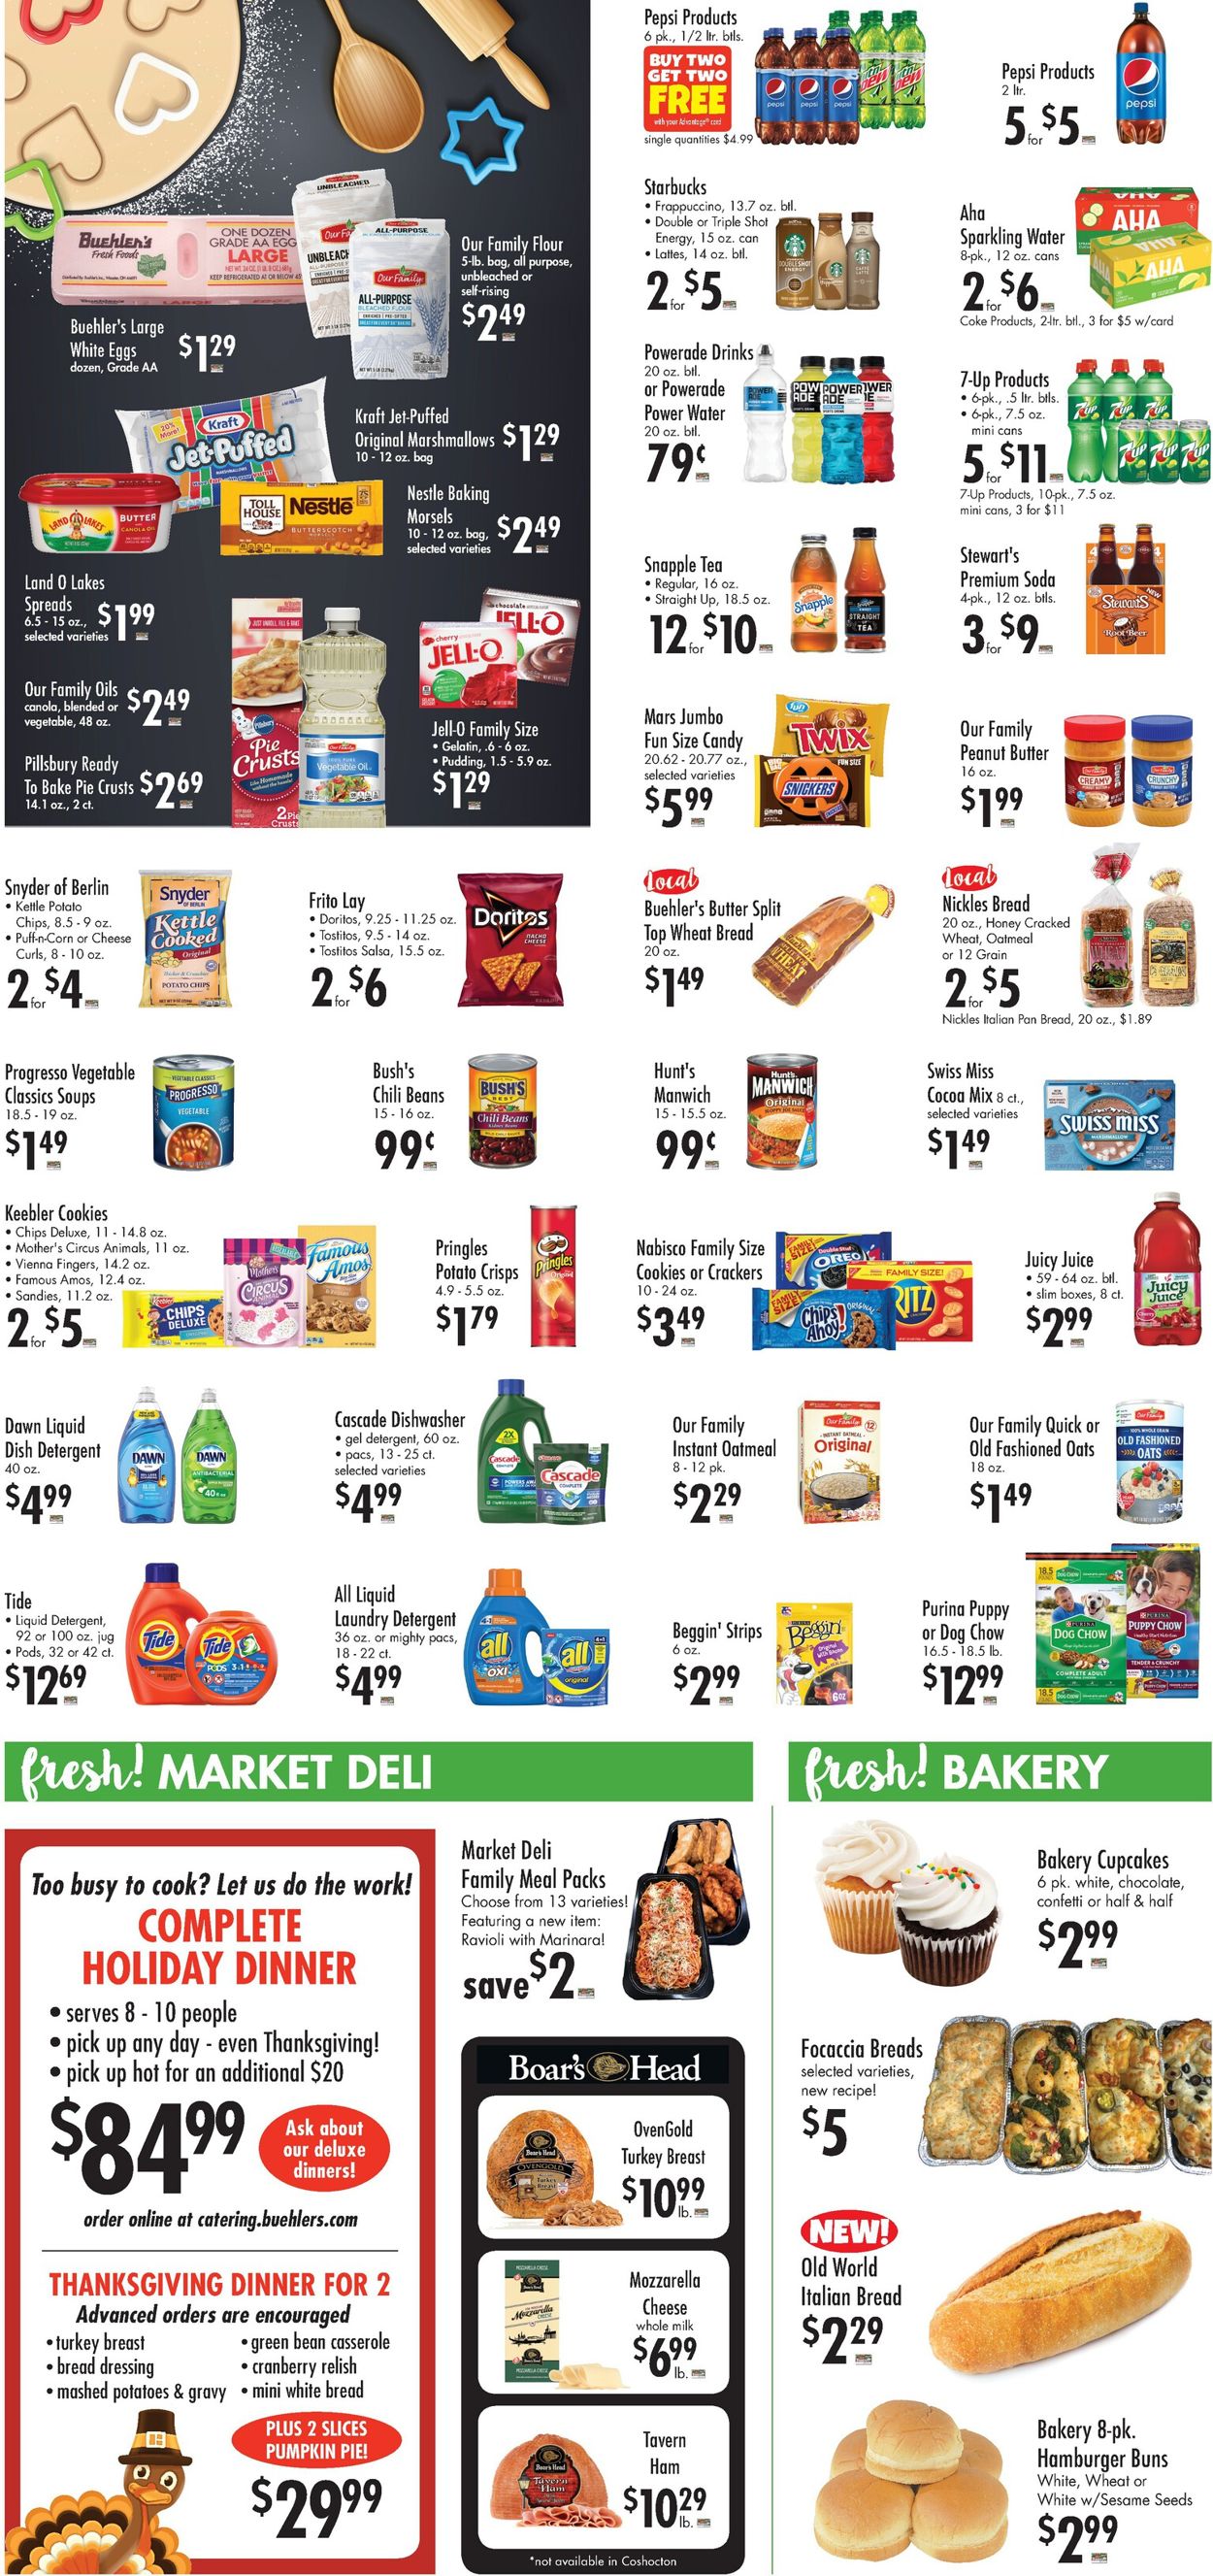 Buehler's Fresh Foods Ad from 10/28/2020